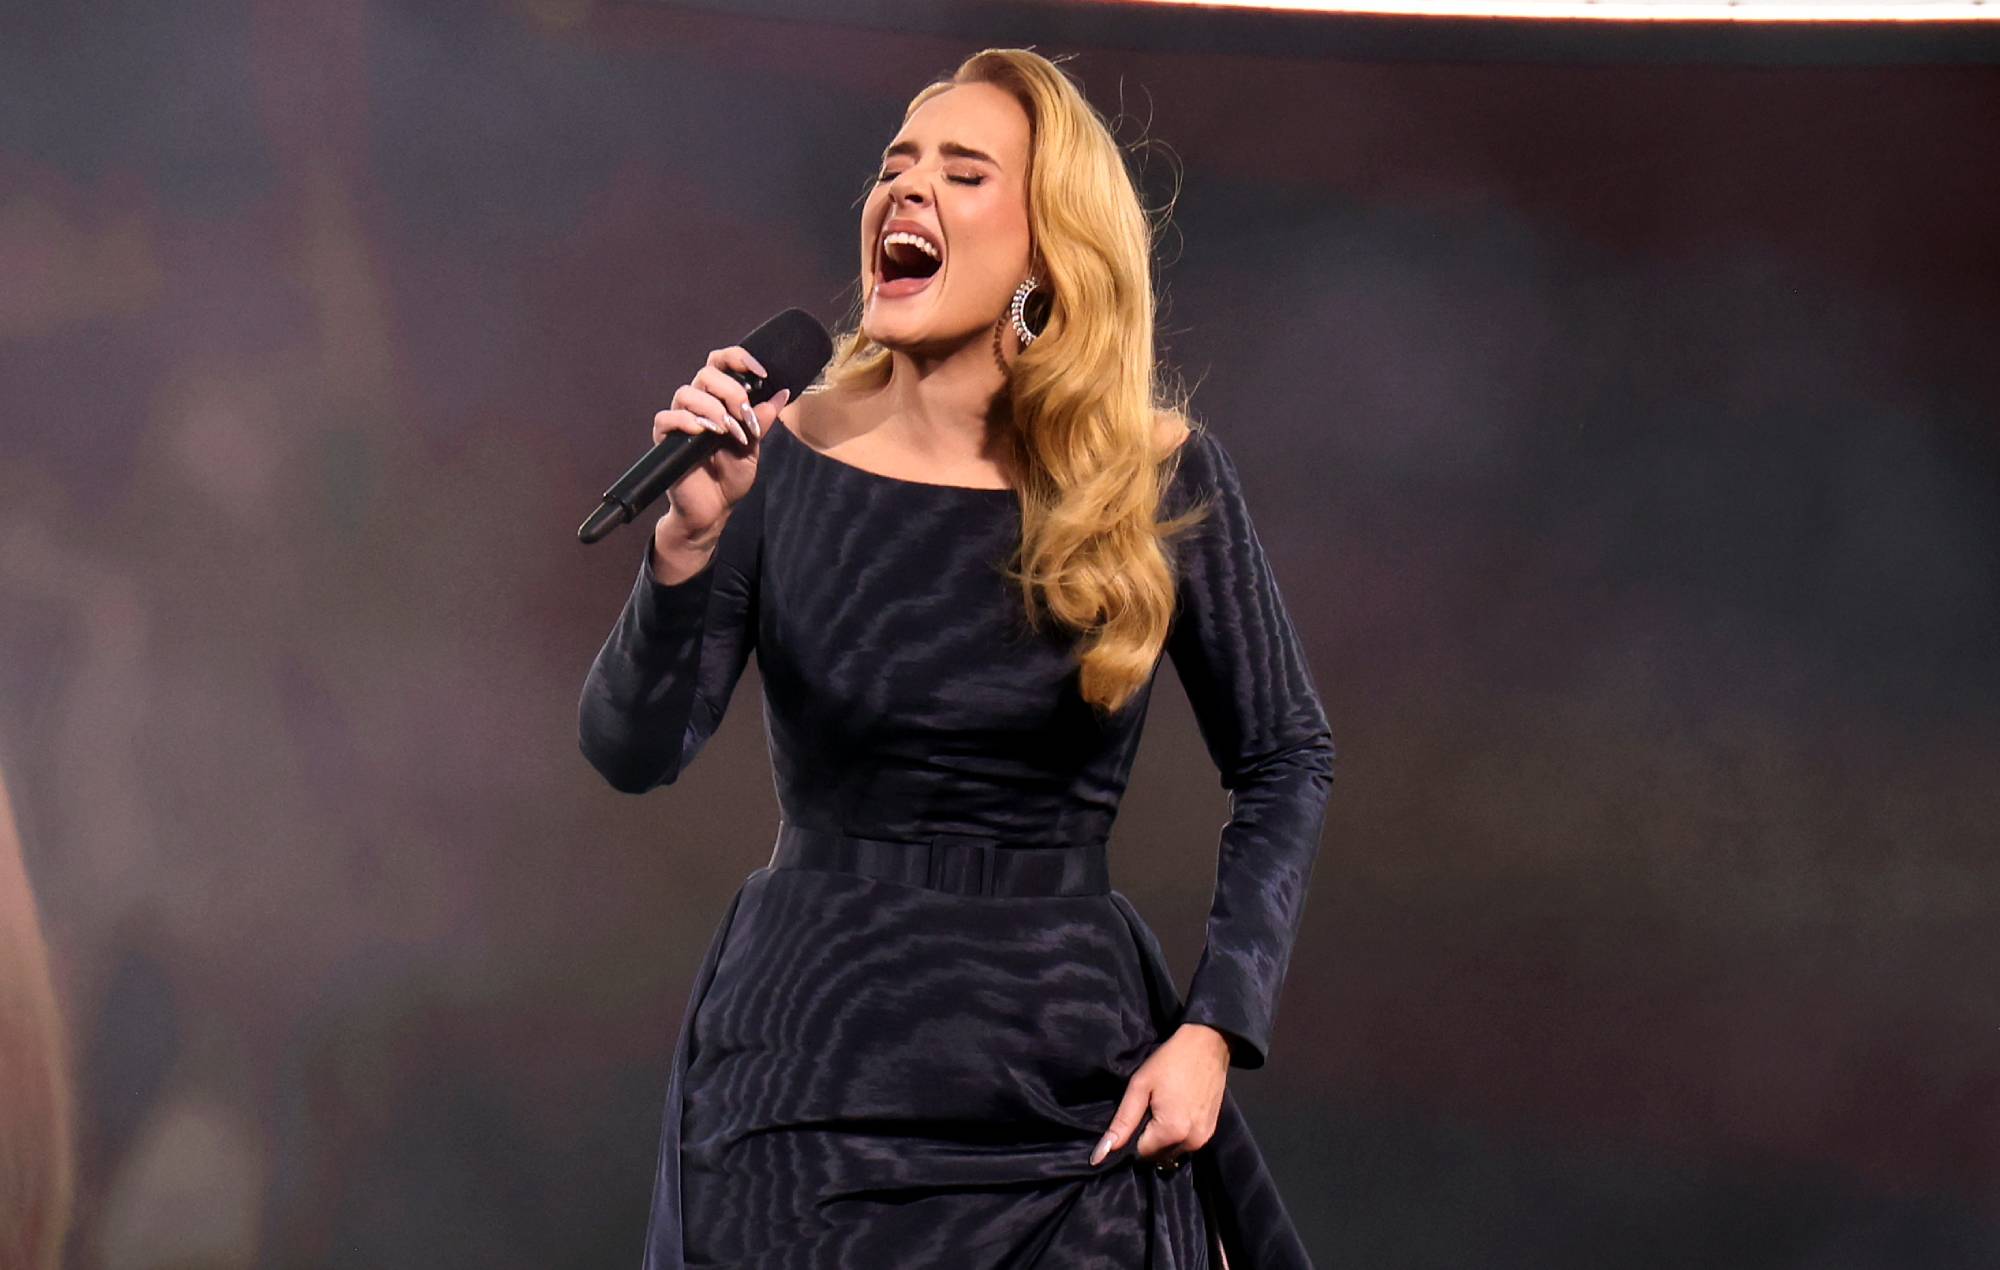 Watch Adele open Munich residency with hits-packed set in front of 80,000 fans